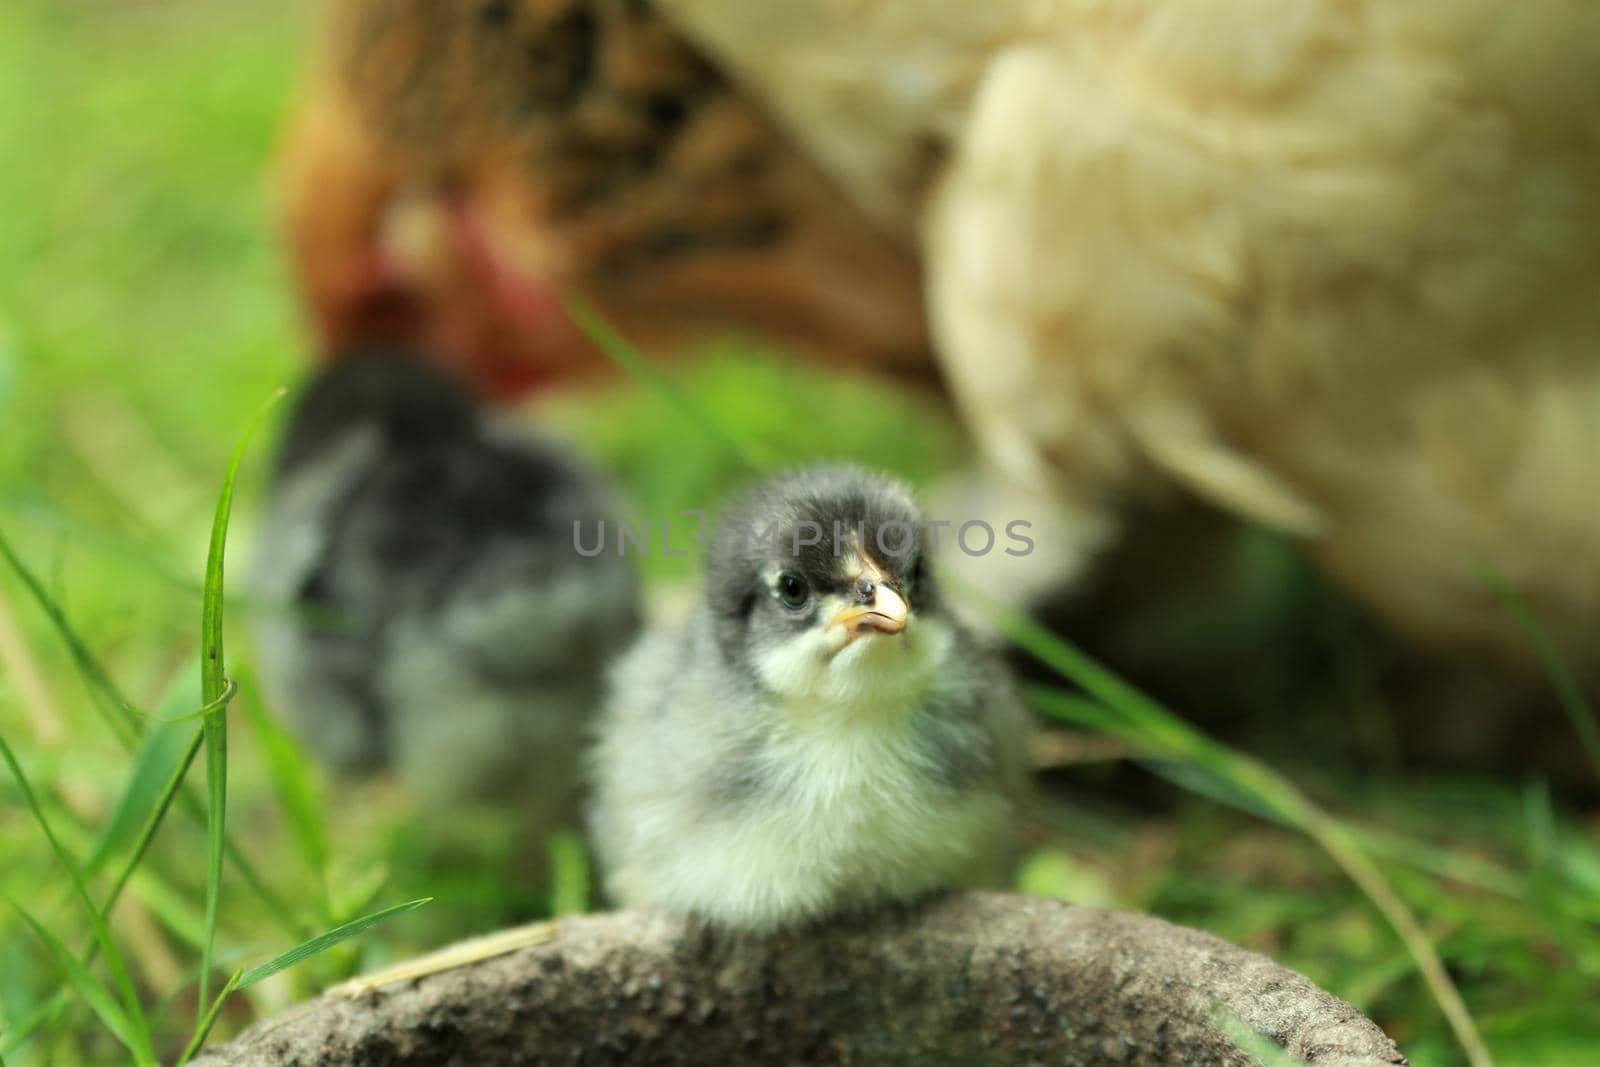 A little young chicken chick in the grass in front of a potions by Luise123